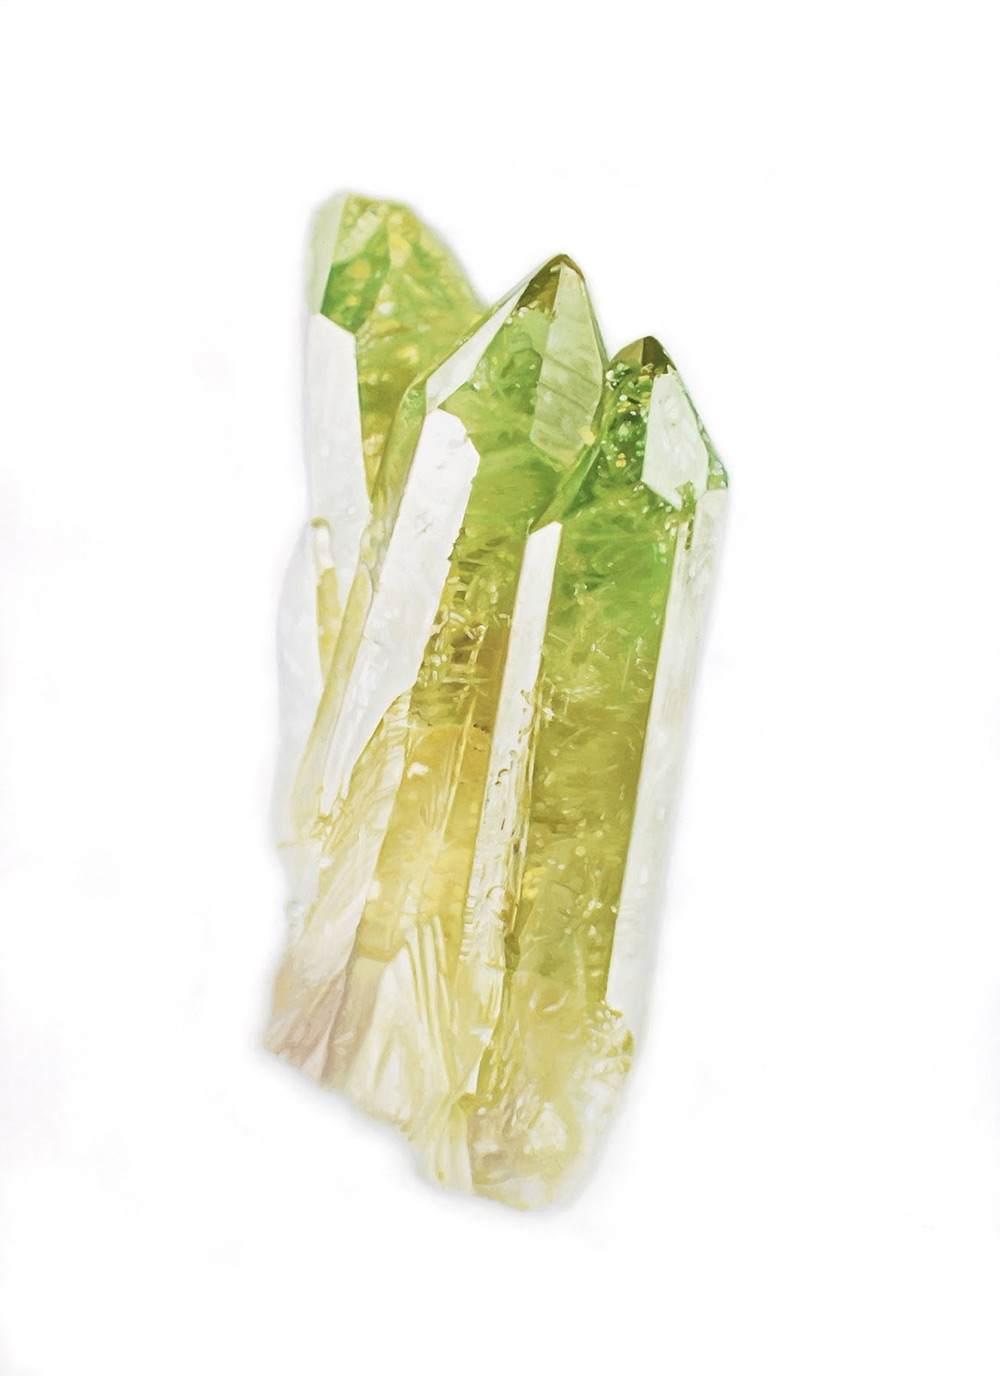 Hyper Realistic Paintings Of Crystals And Minerals By Carly Waito 7